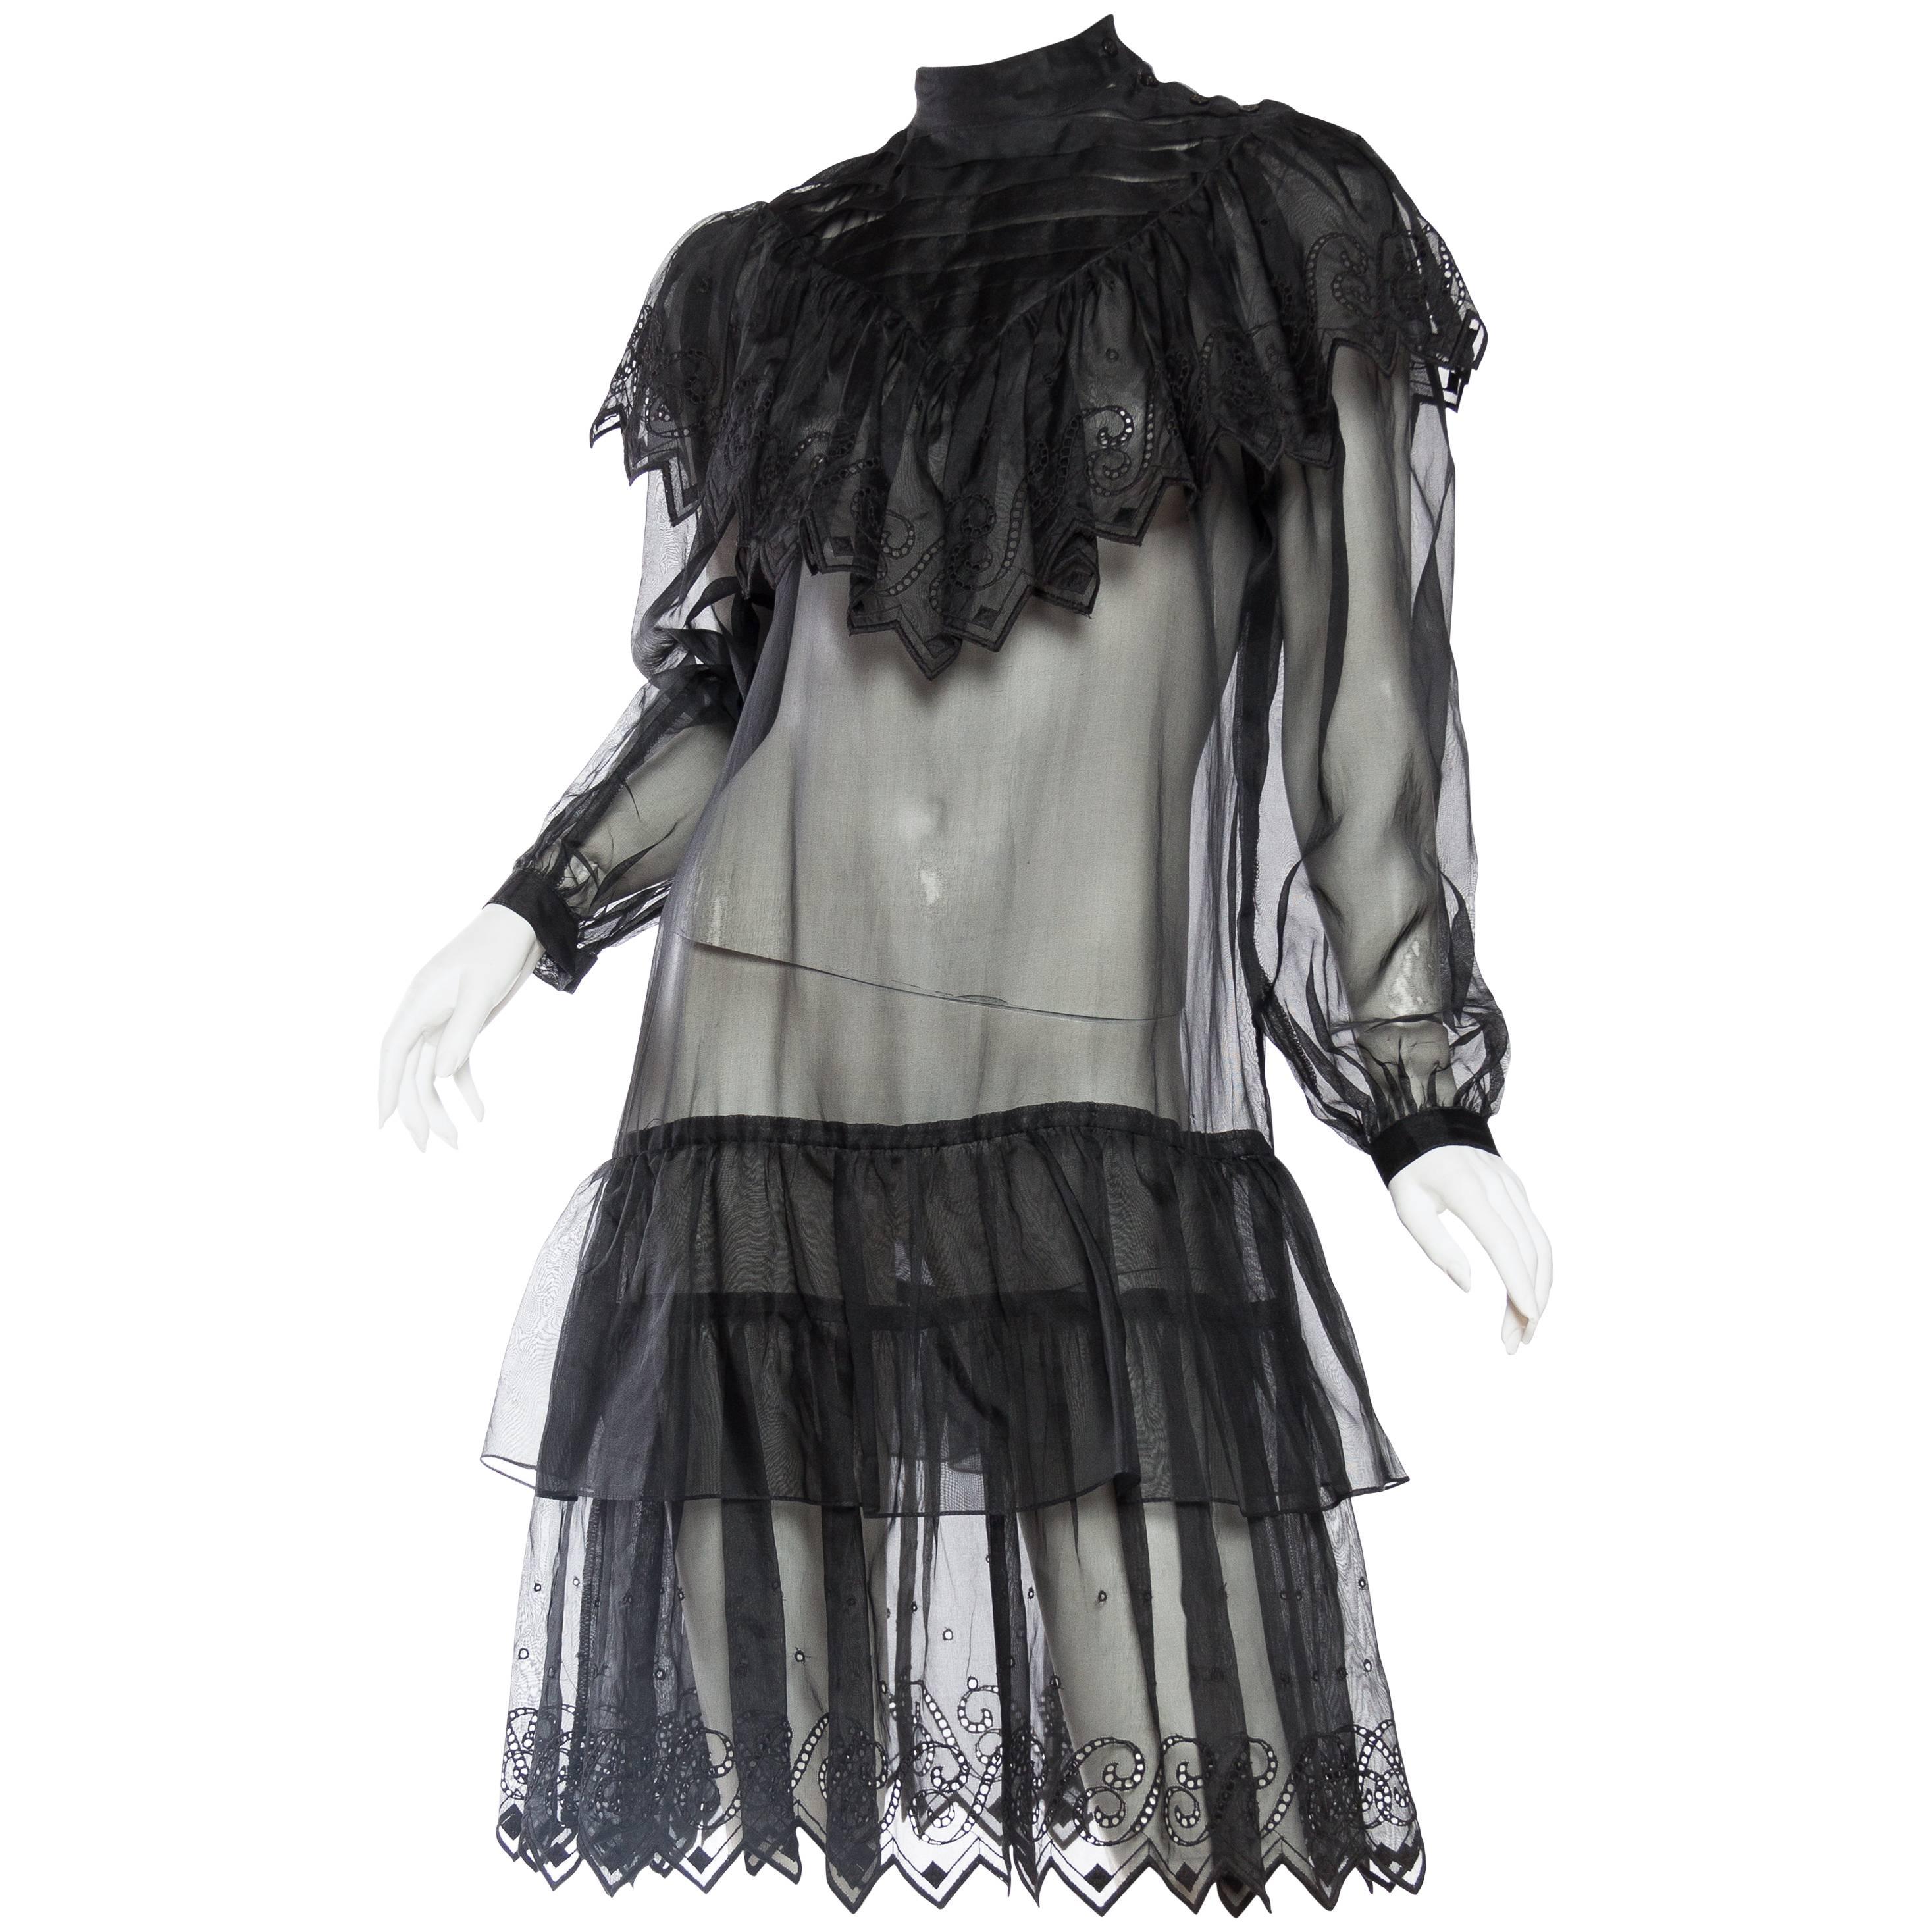 1970s Gucci Style Silk Organza Victorian Inspired Sheer Lace Dress